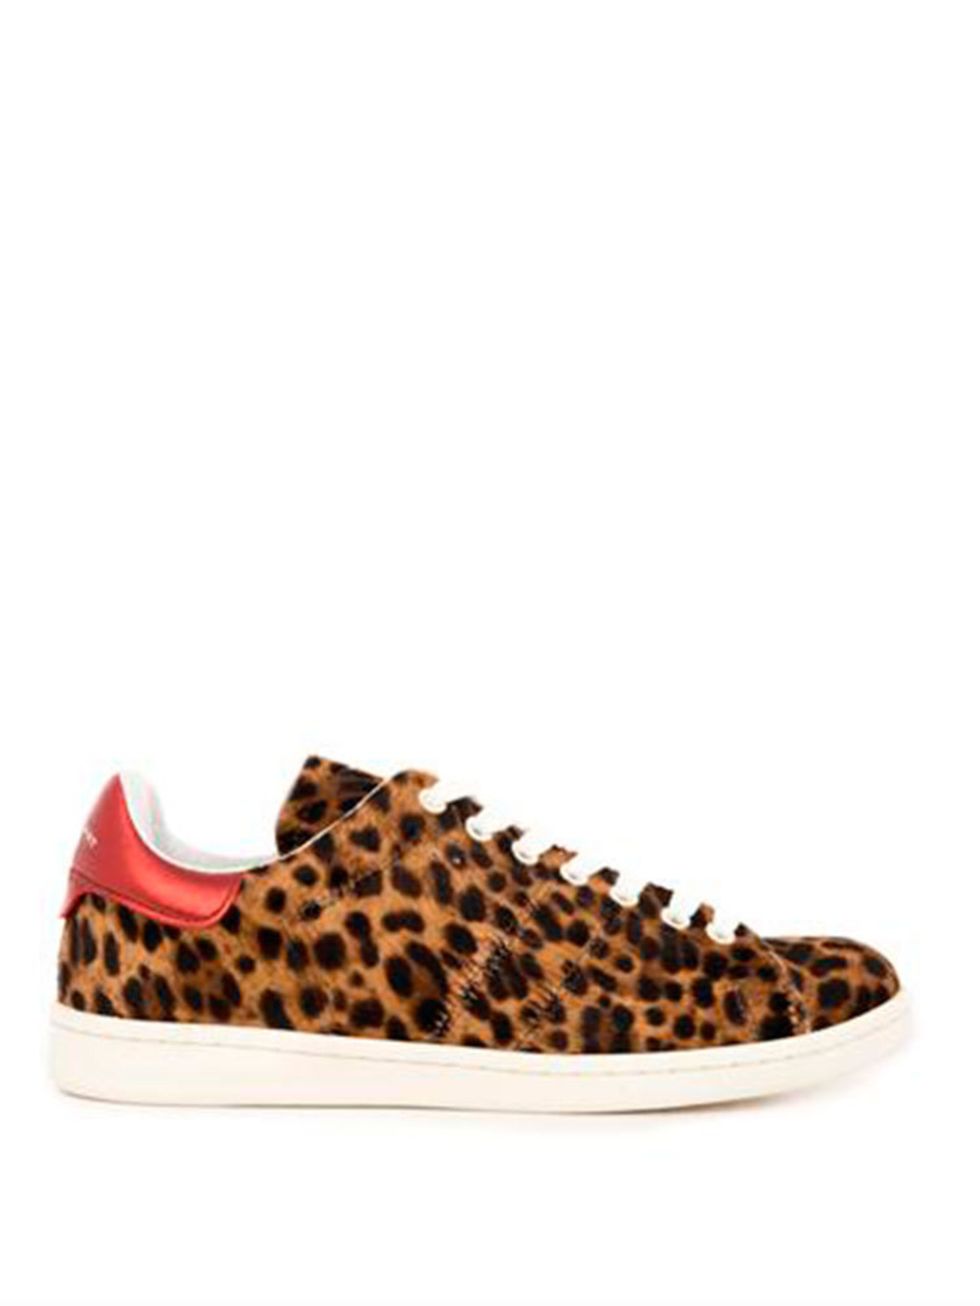 <p>Isabel Marant sneakers, £335 from <a href="http://www.matchesfashion.com/product/204179" target="_blank">Matchesfashion</a></p>